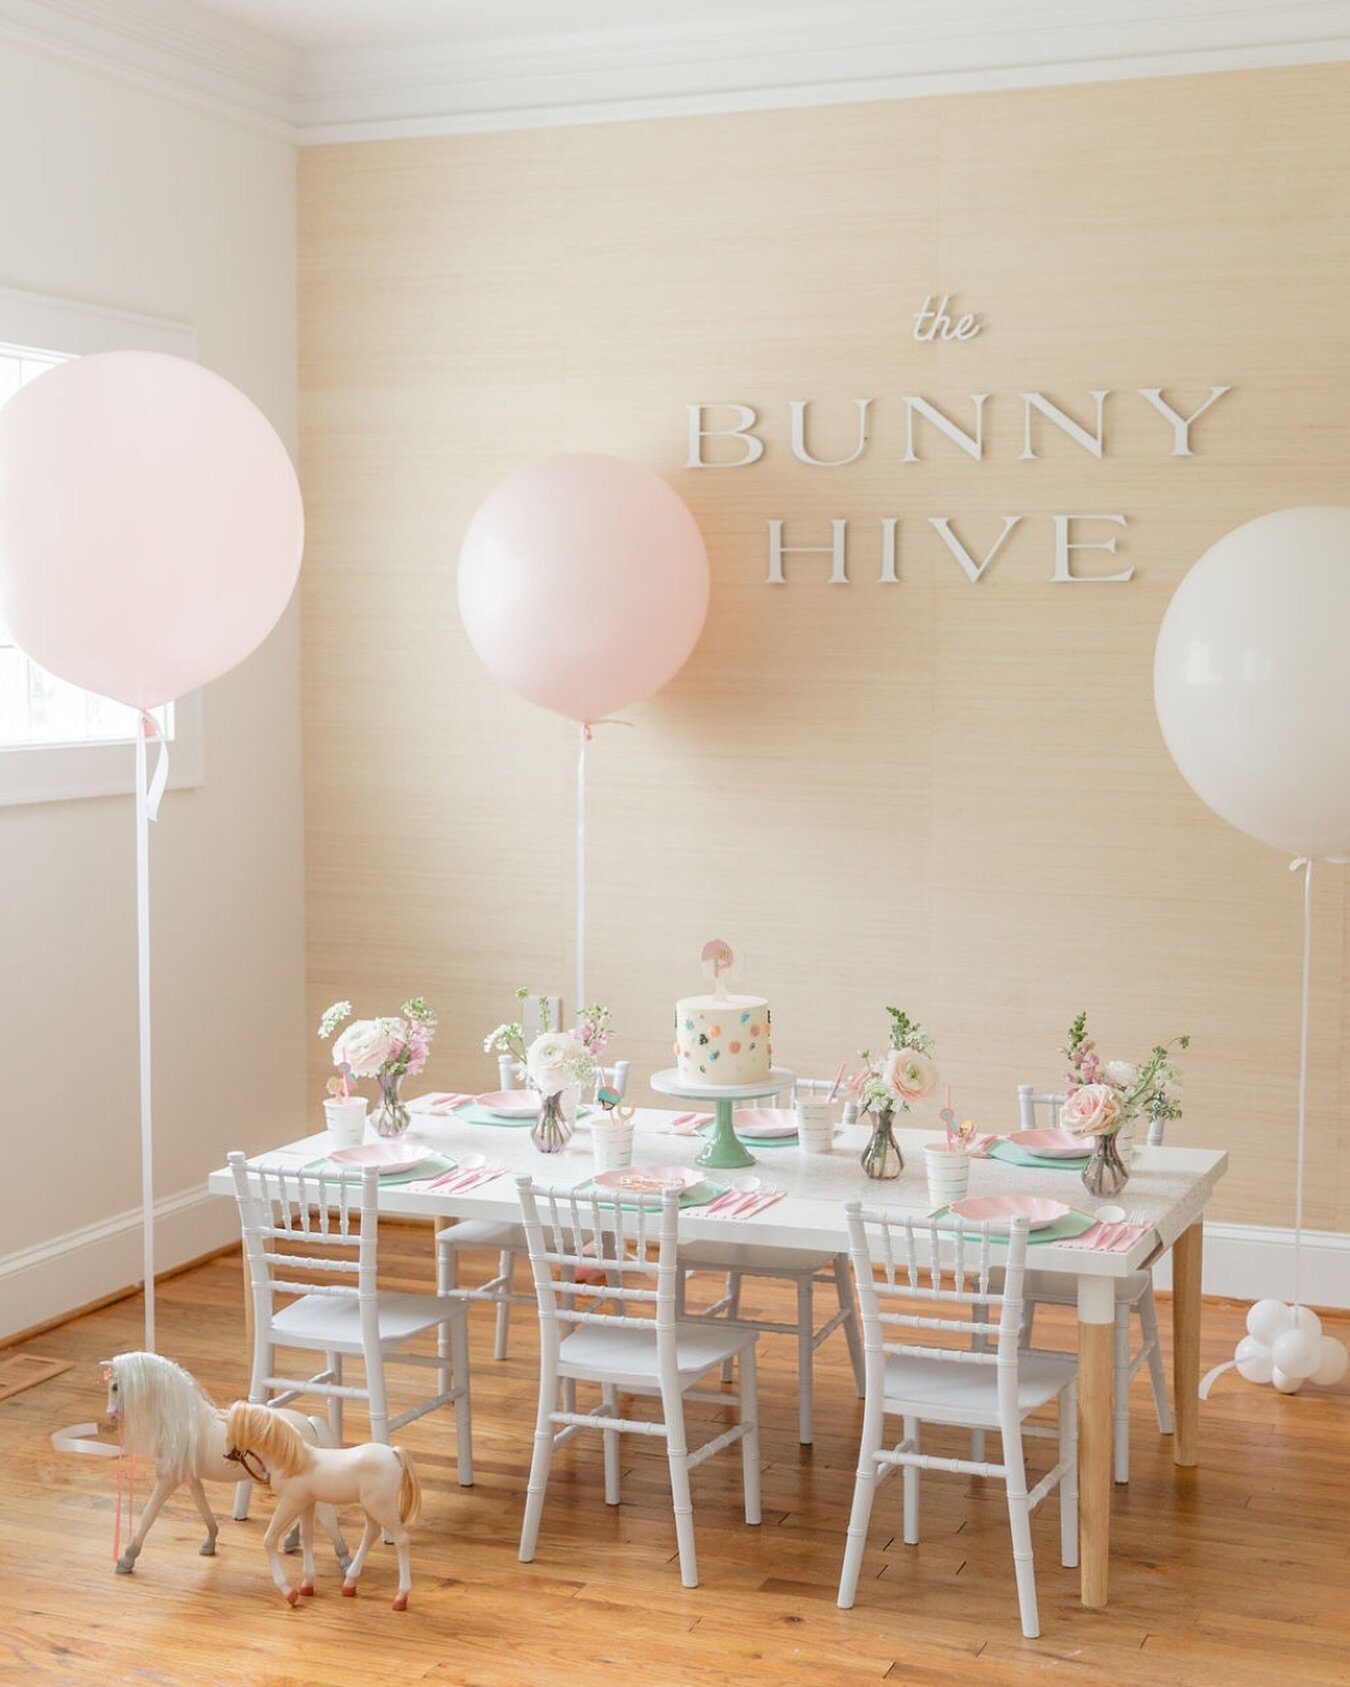 Jumbo balloons 🤝 any celebration

Jumbos add such a fun flare to parties, especially parties at @thebunnyhiveraleigh

Since their opening, they have quickly become one of our favorite places to throw kids celebrations in Raleigh! If you haven&rsquo;